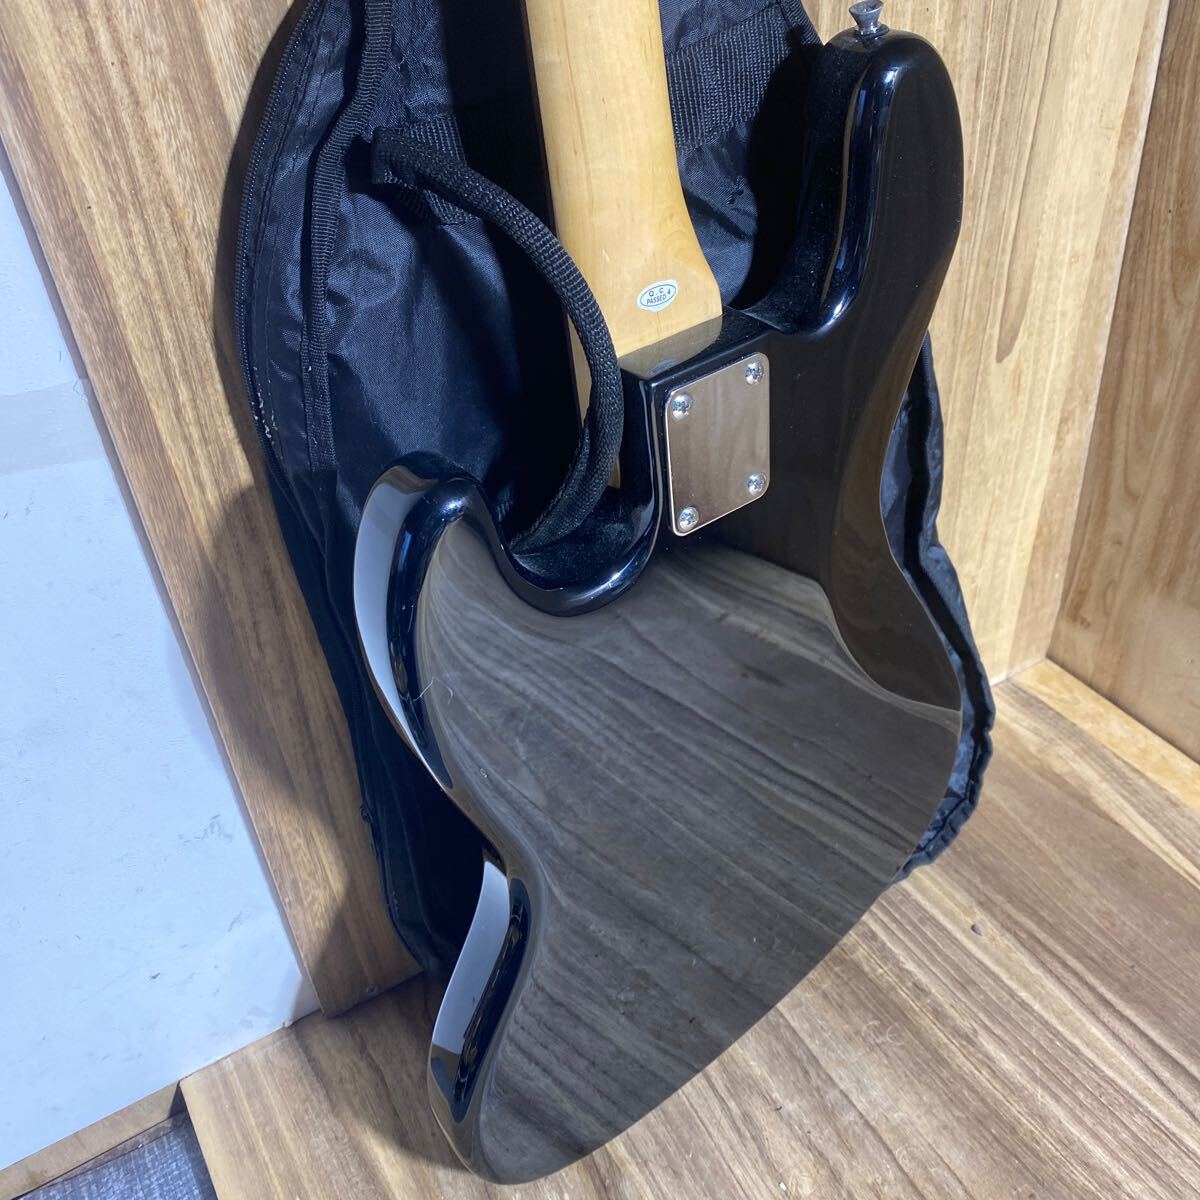 PhotoGenic electric bass black soft case attaching sound out has confirmed 